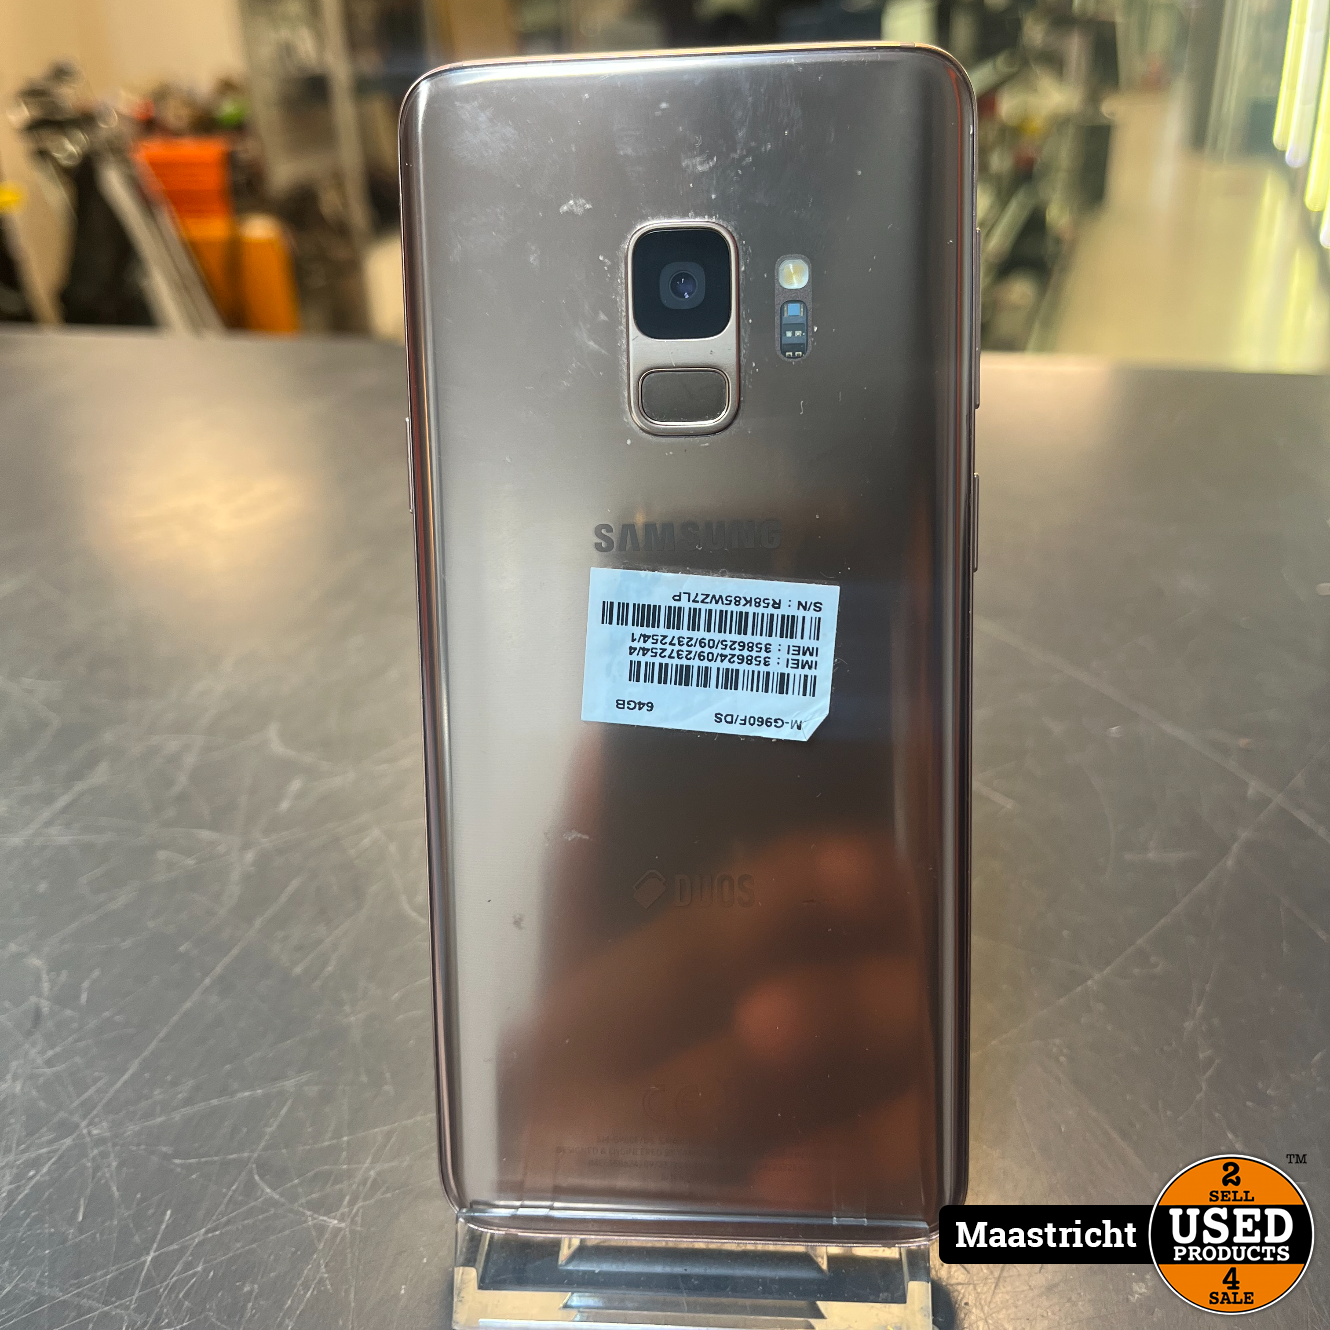 mengsel eiland pols Samsung Galaxy S9 + lader - Used Products Maastricht